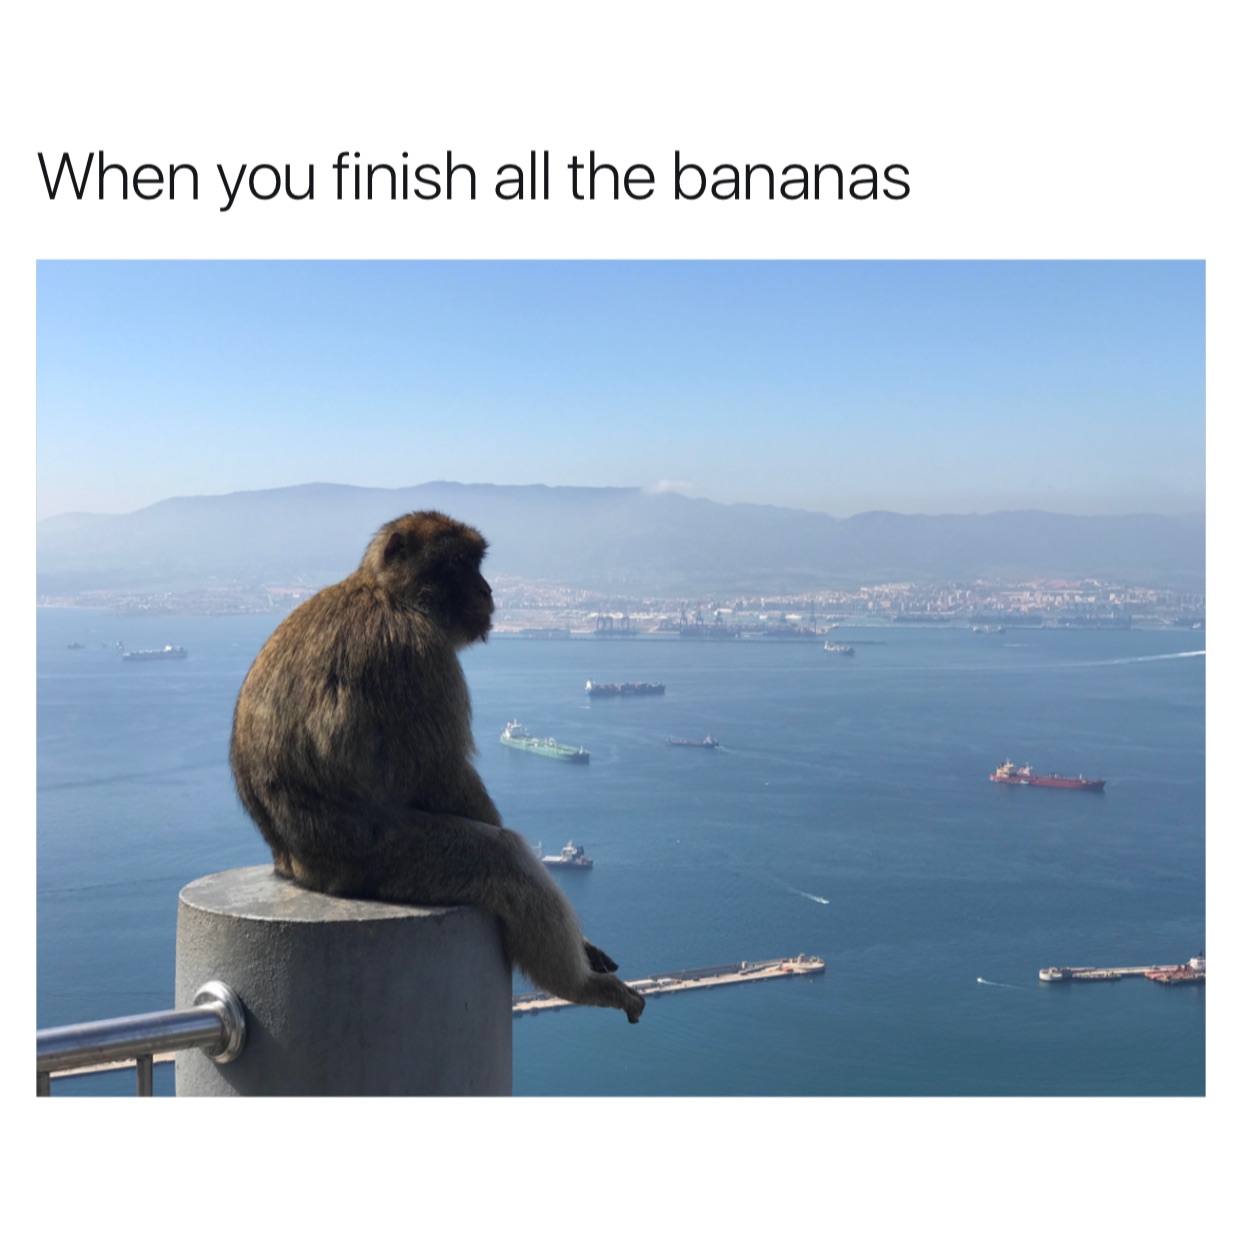 memes - should buy a boat monkey - When you finish all the bananas